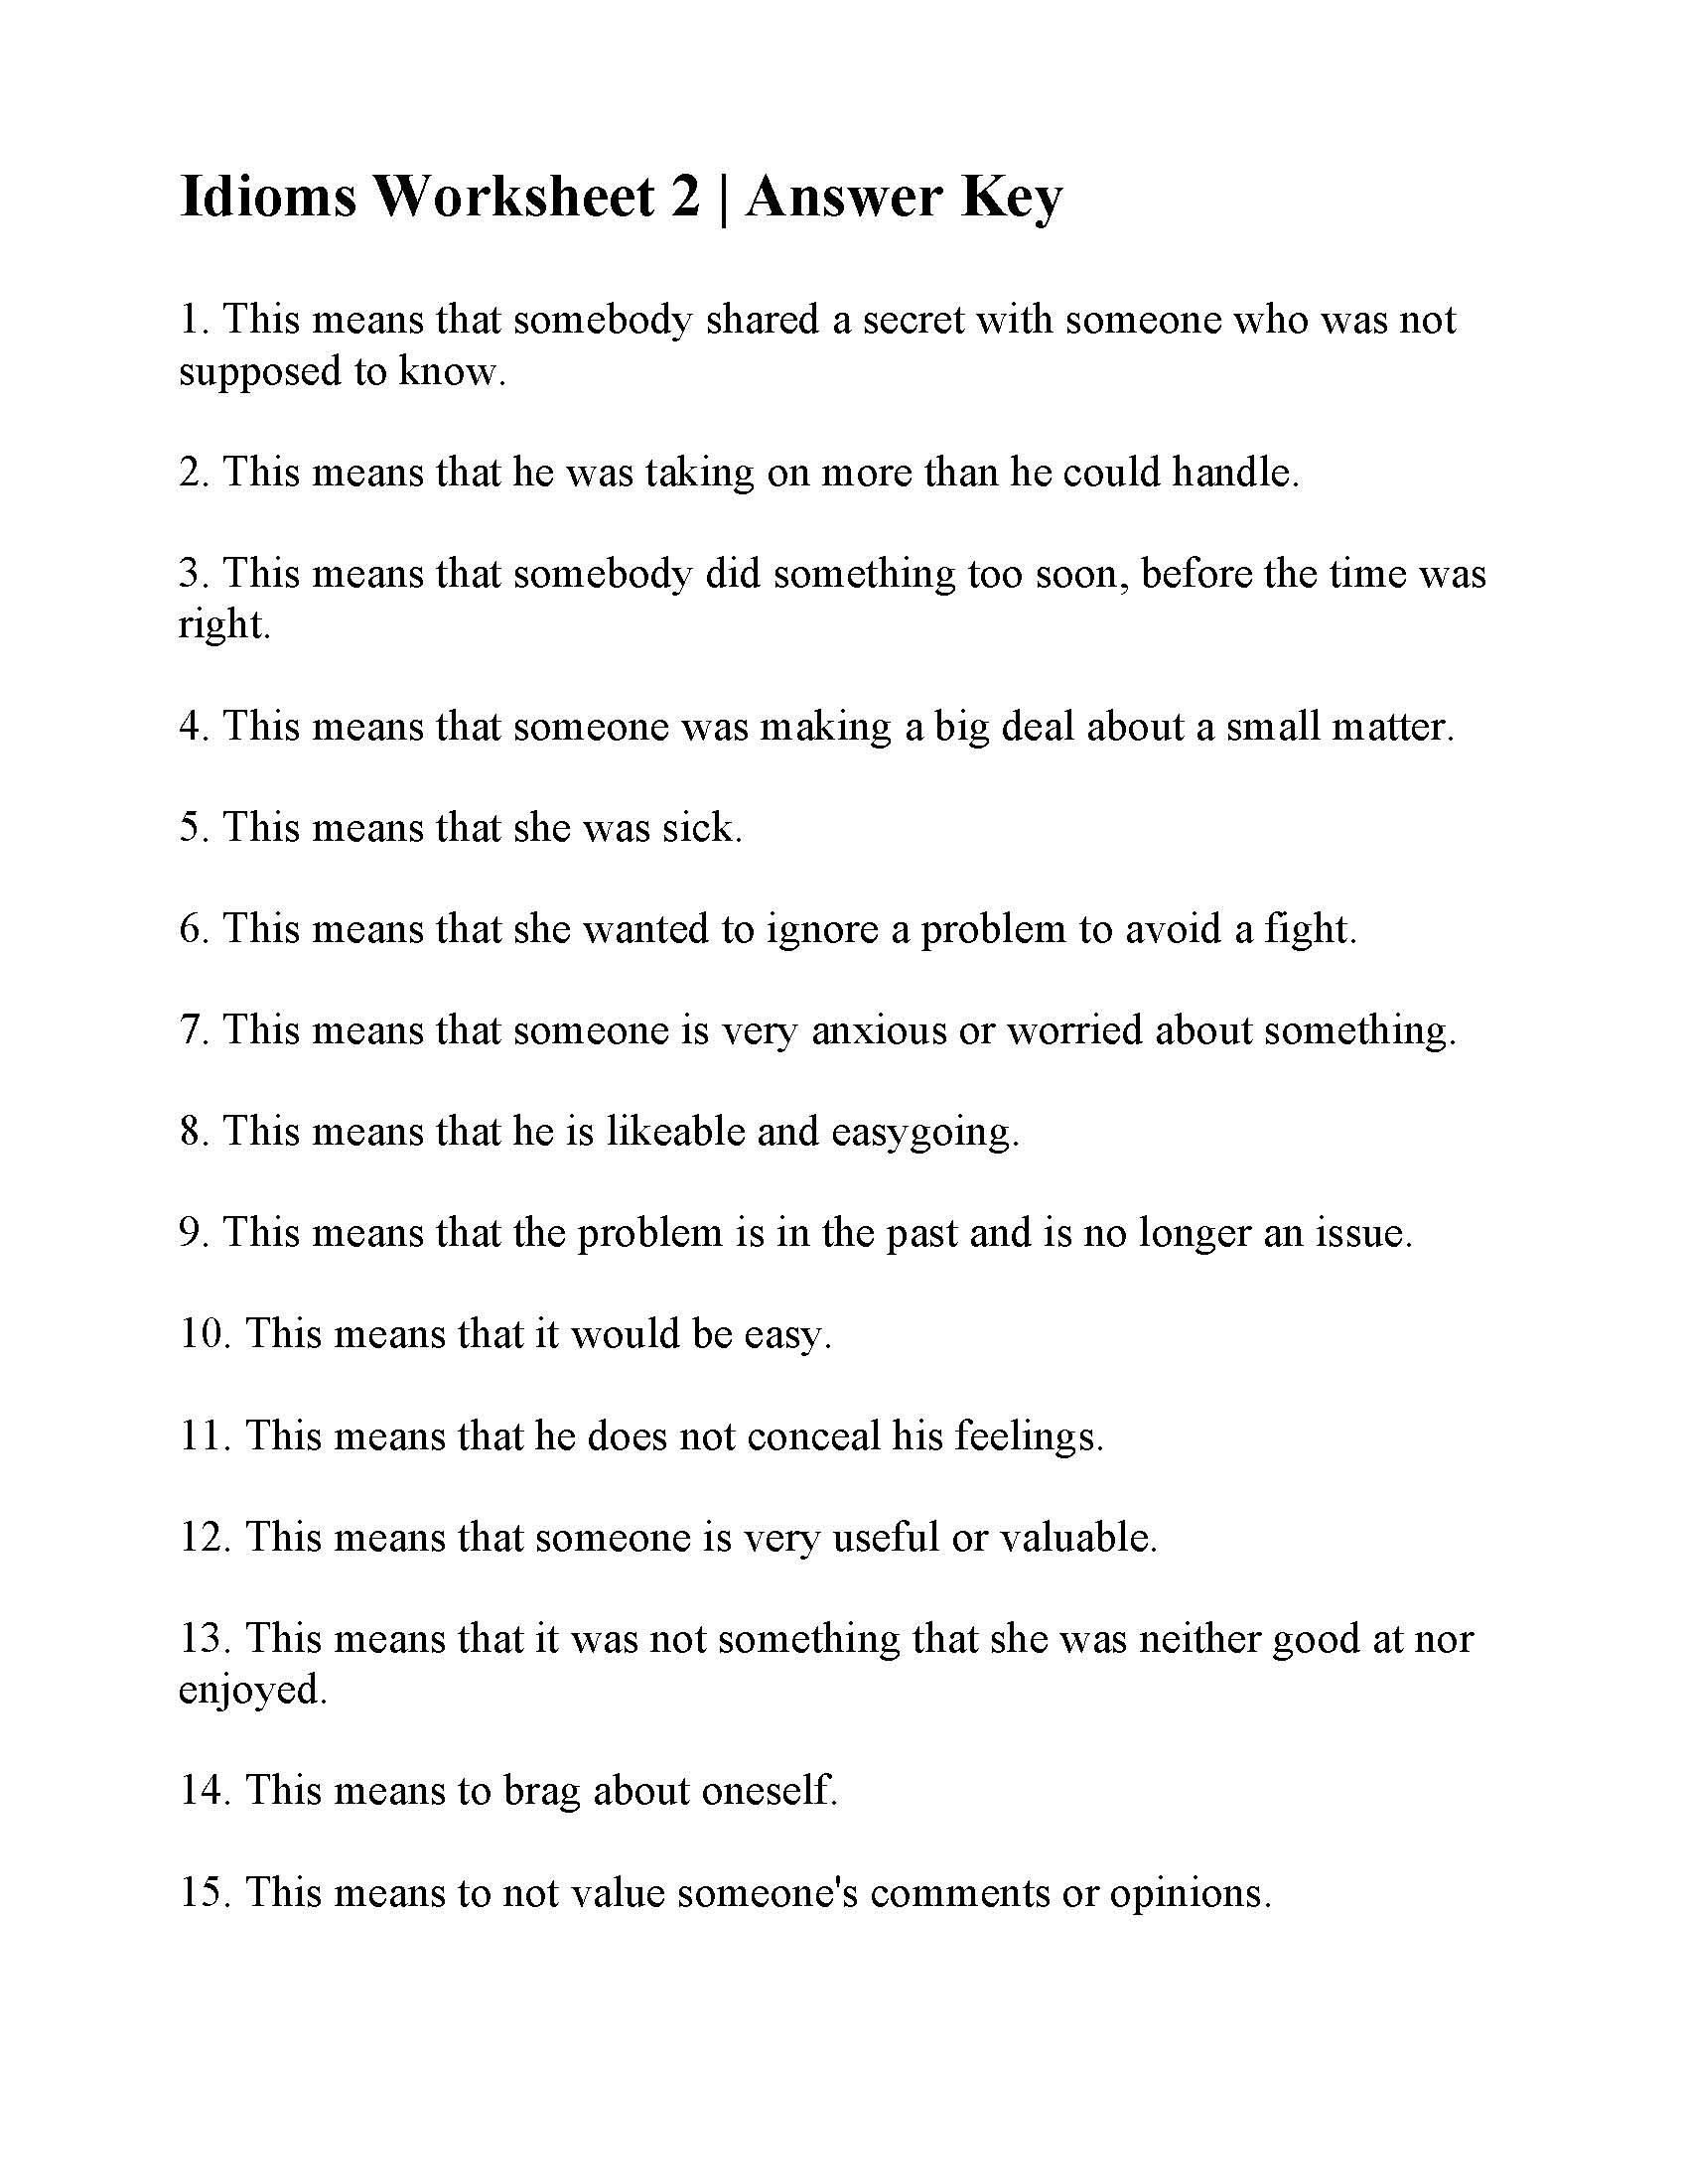 This is a preview image of Idiom Worksheet 2. Click on it to enlarge it or view the source file.